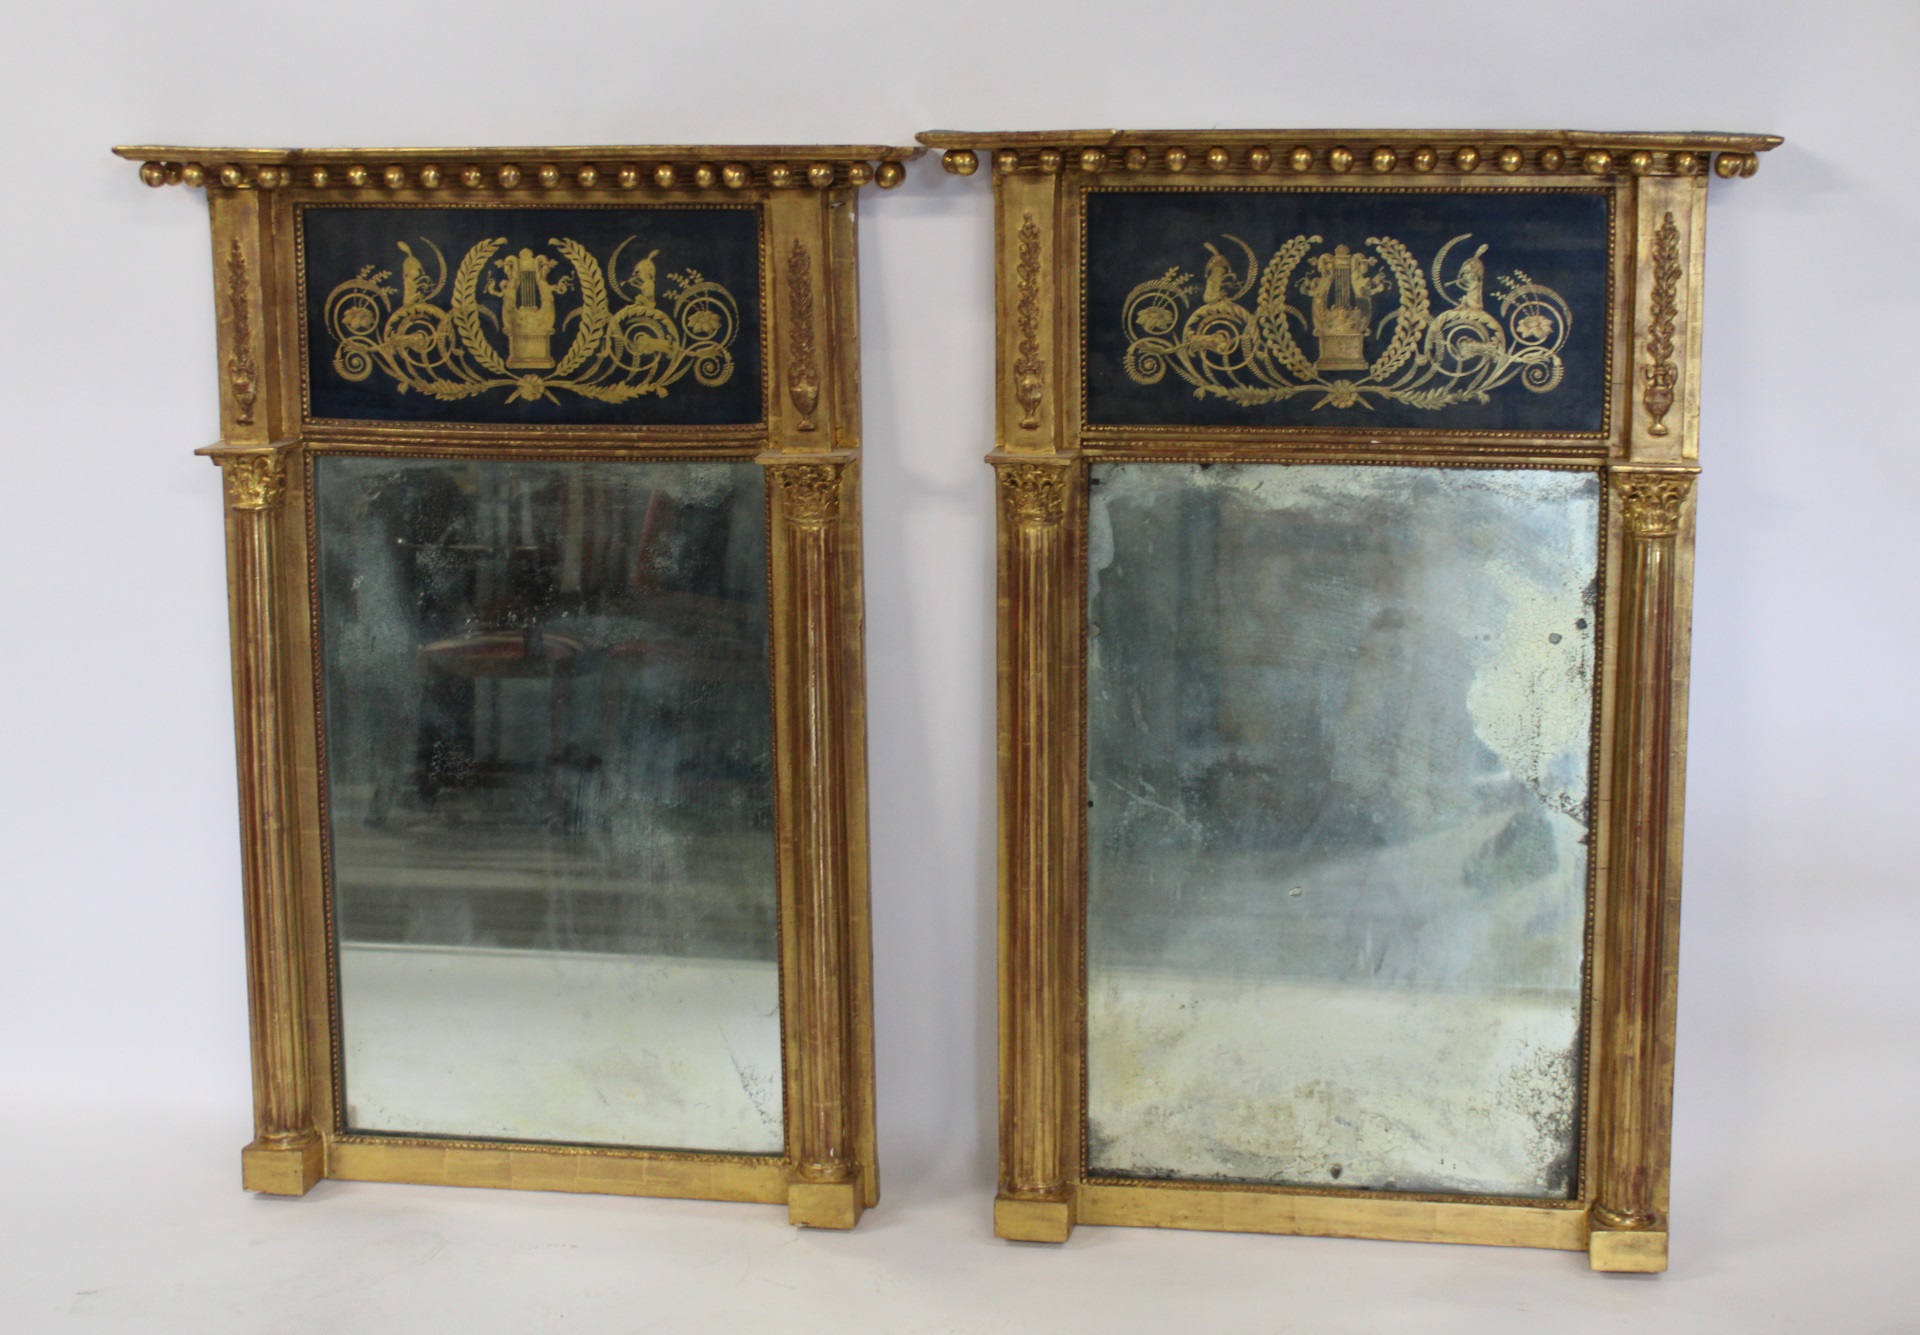 MAGNIFICENT PAIR OF SHERATON MIRRORS